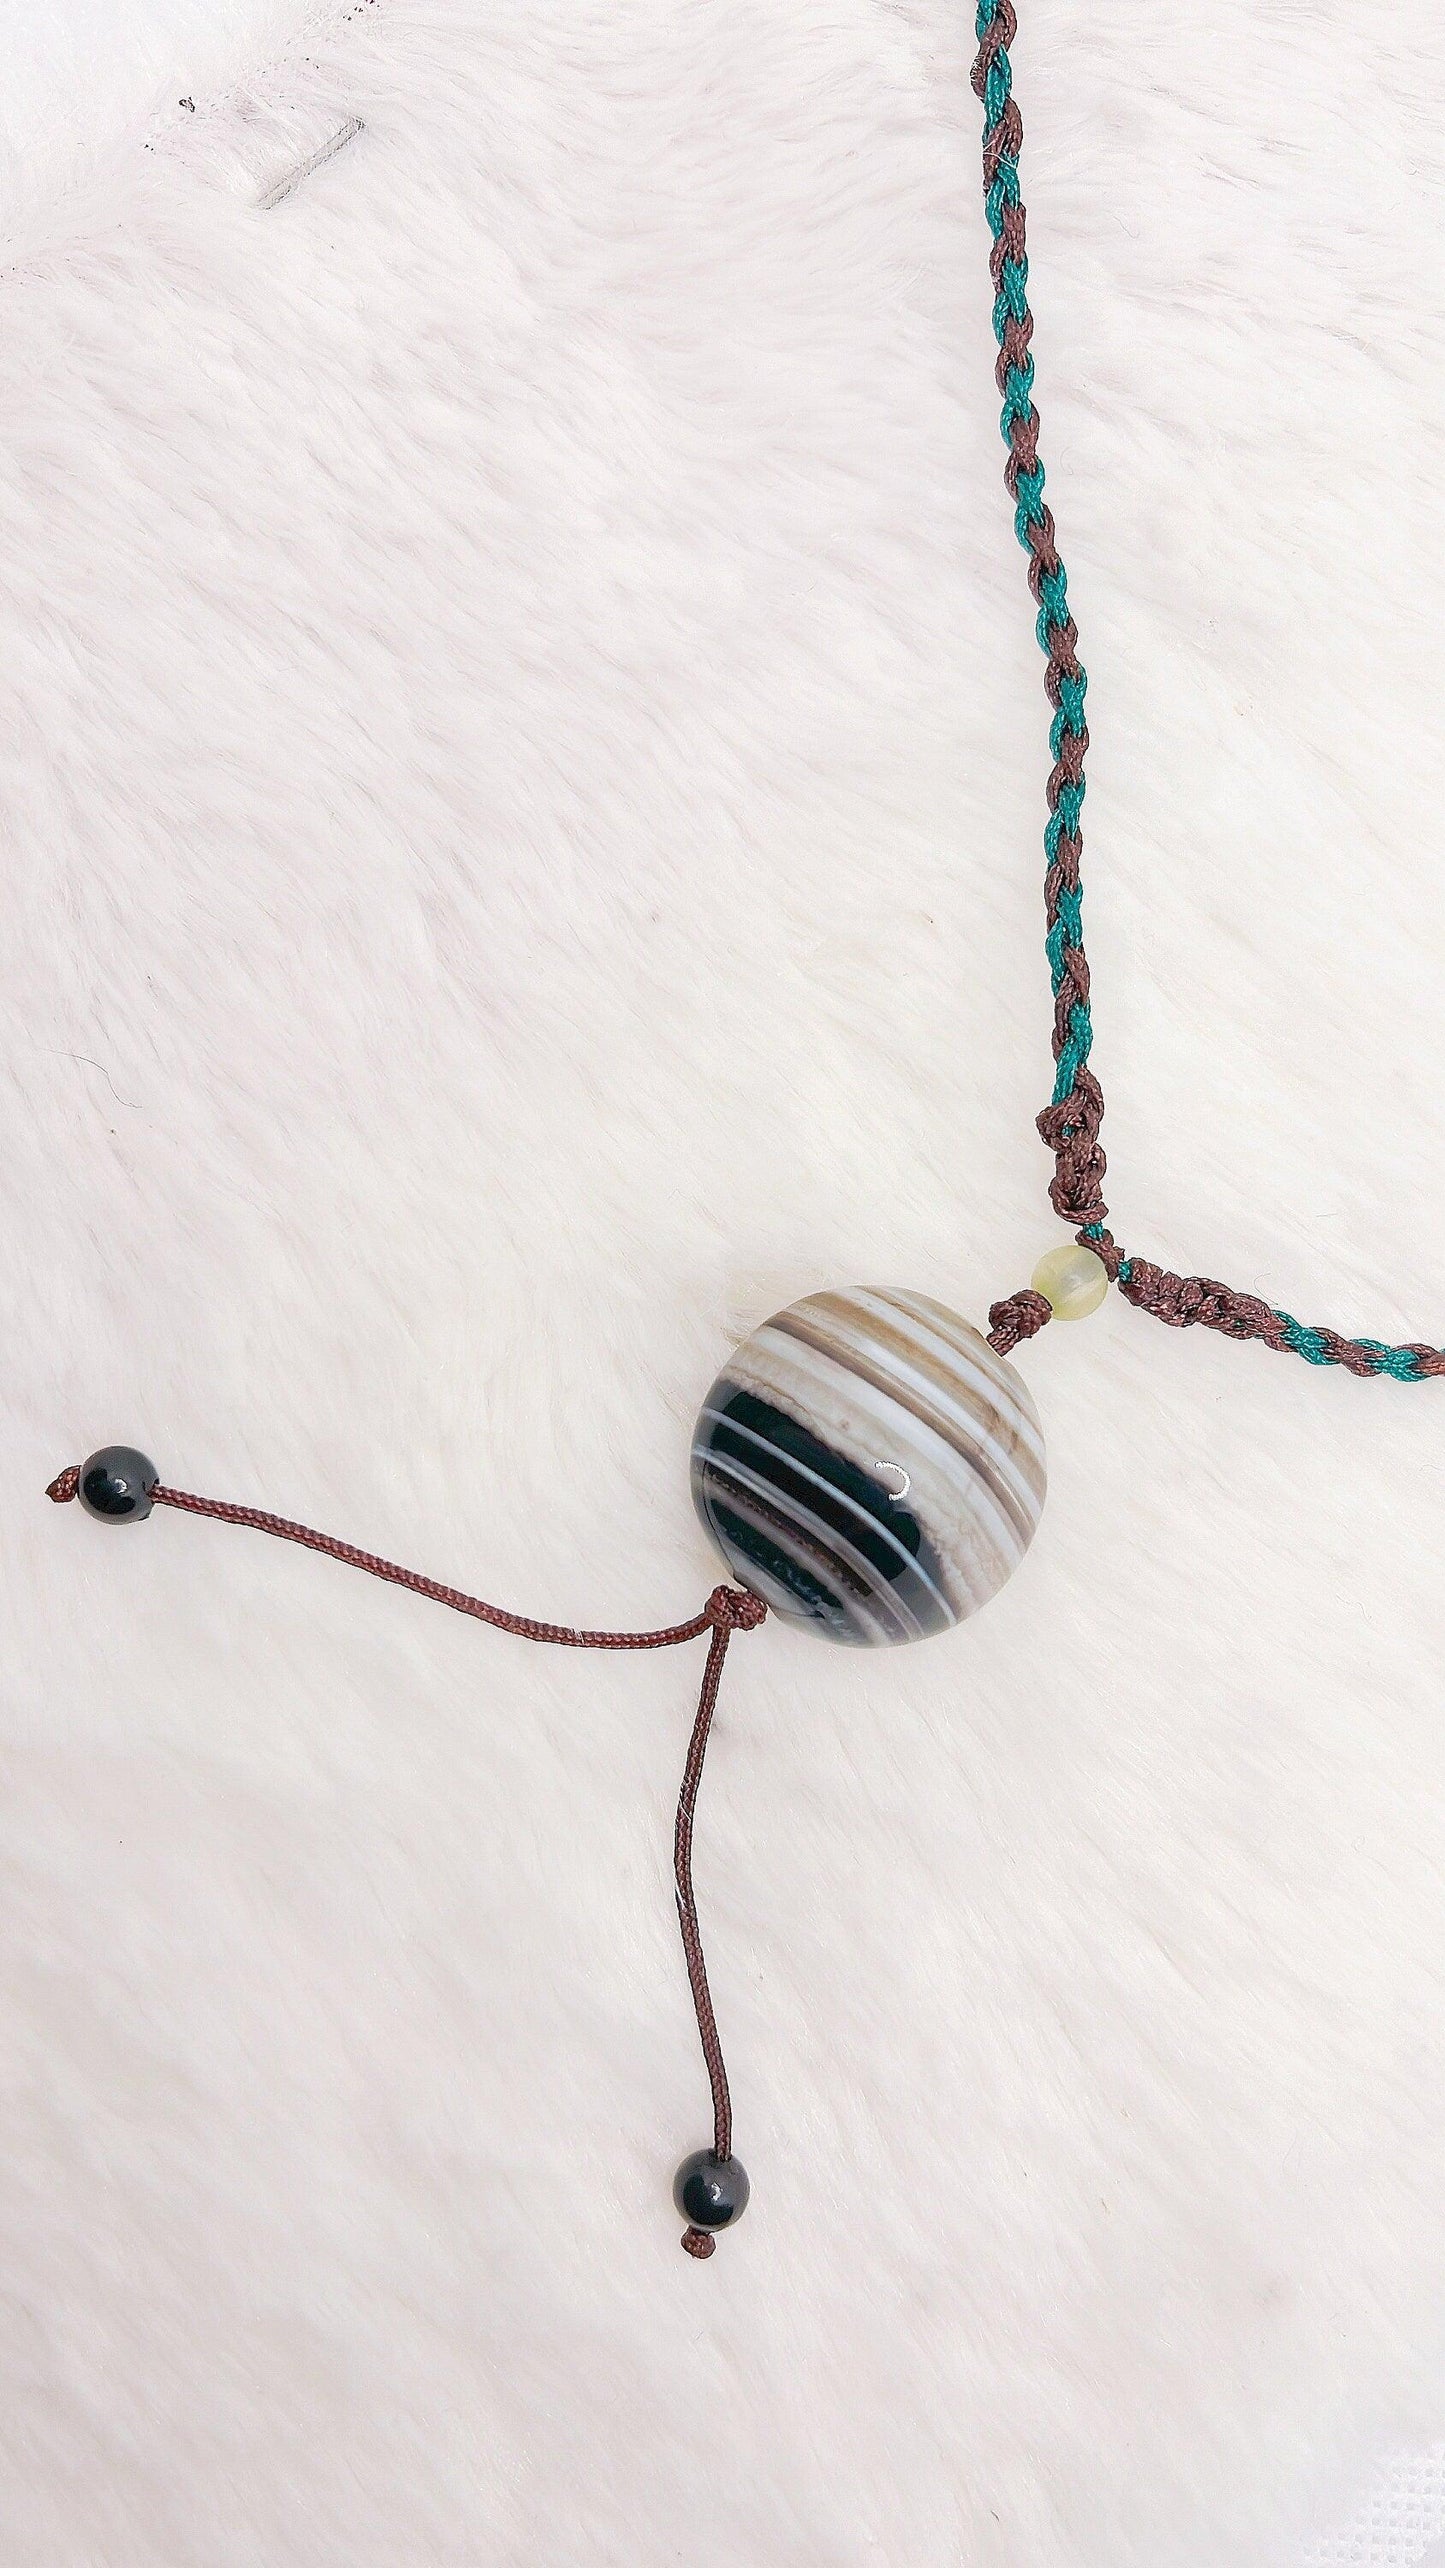 Boho Earthy String Adjustable Black White Stone Necklace, Agate Stone Jewelry, Natural Stone Necklace, Adjustable Necklace, Gift for her